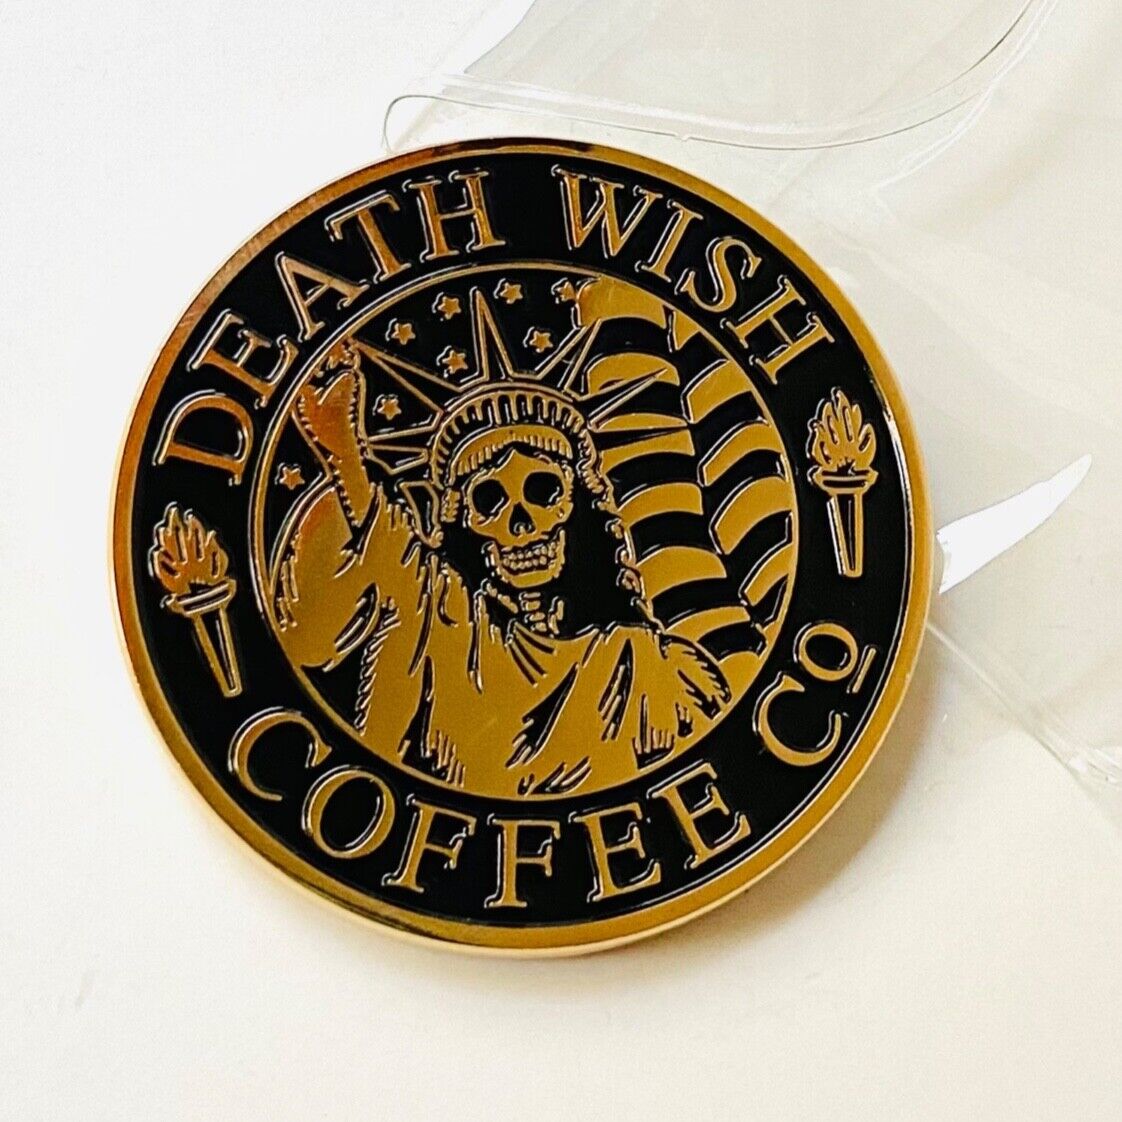 DEATH WISH COFFEE CO LADY LIBERTY Challenge COIN Statue of Liberty theme DWCC